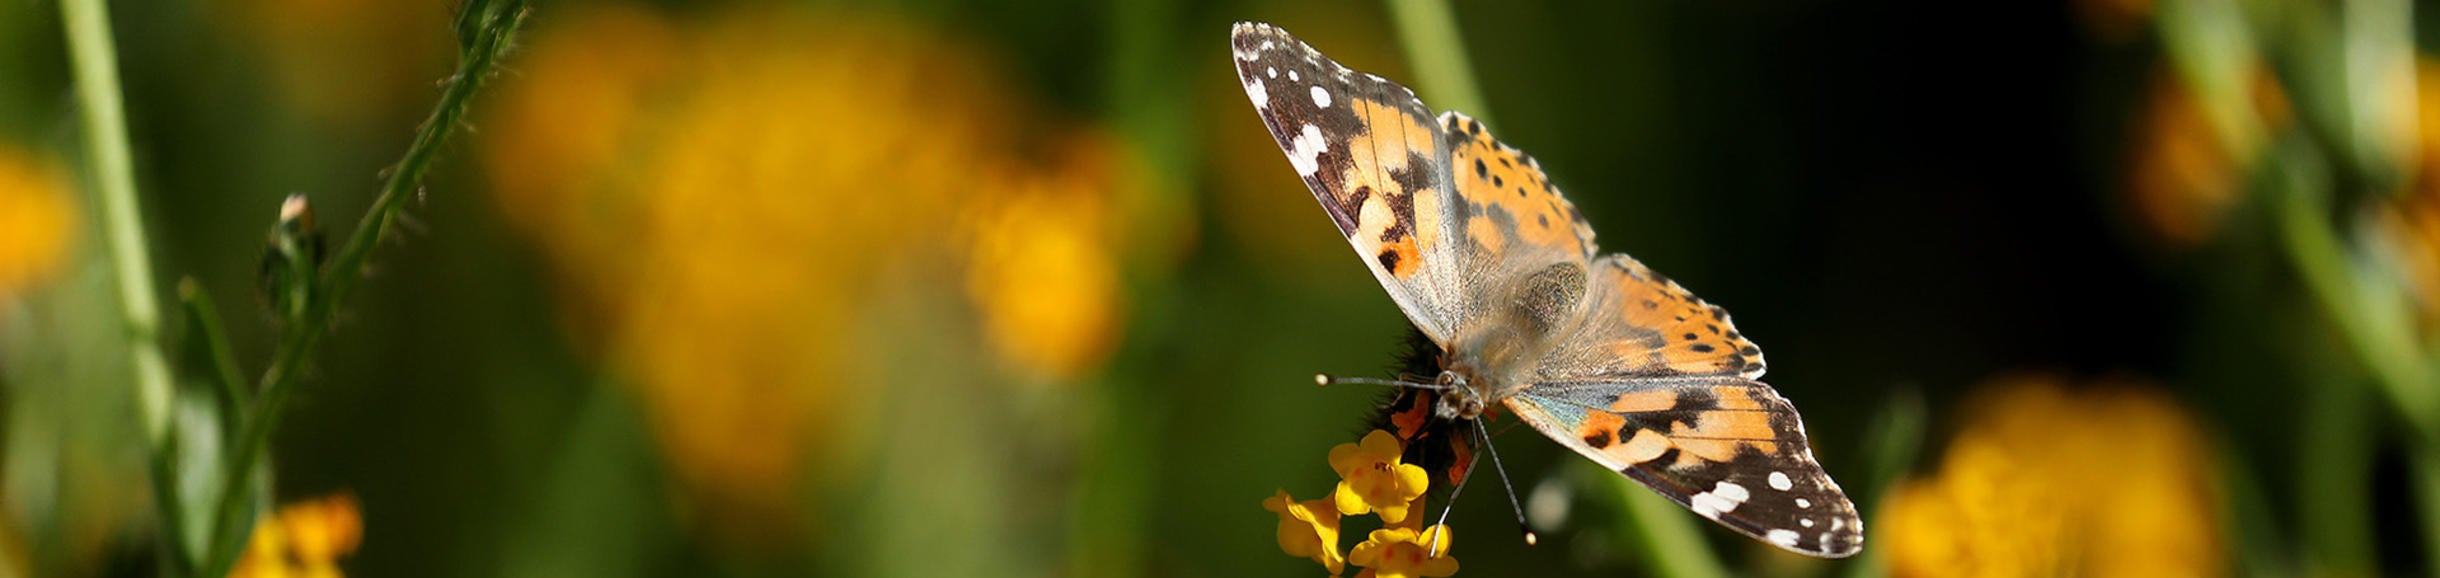 Painted Lady butterfly at Motte Rimrock (c) UCR / Stan Lim